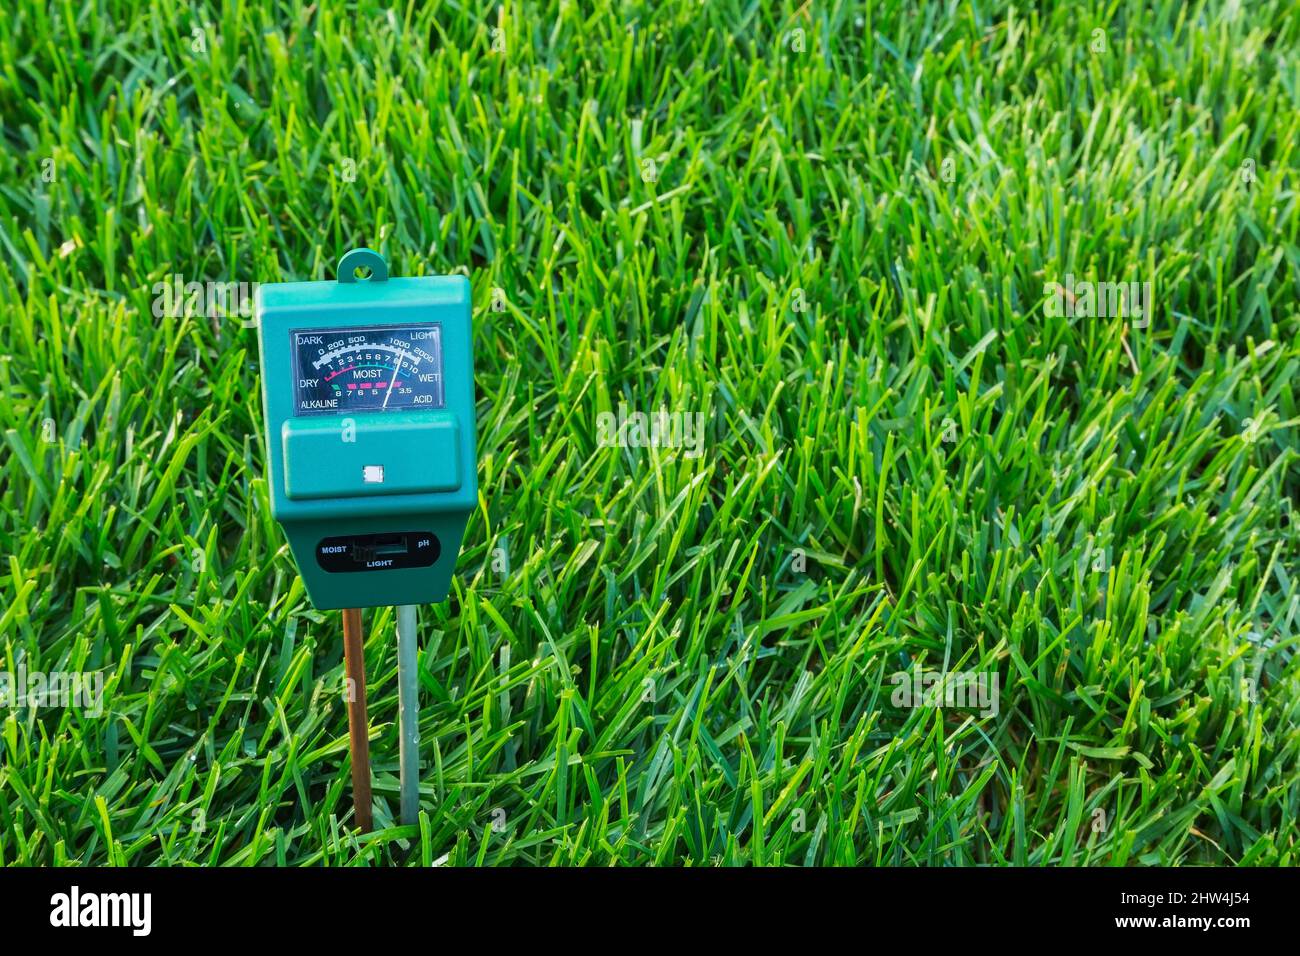 3 in 1 luminance, moisture and pH meter indicating soil condition of Poa pratensis  - Kentucky Bluegrass lawn is quite moist. Stock Photo